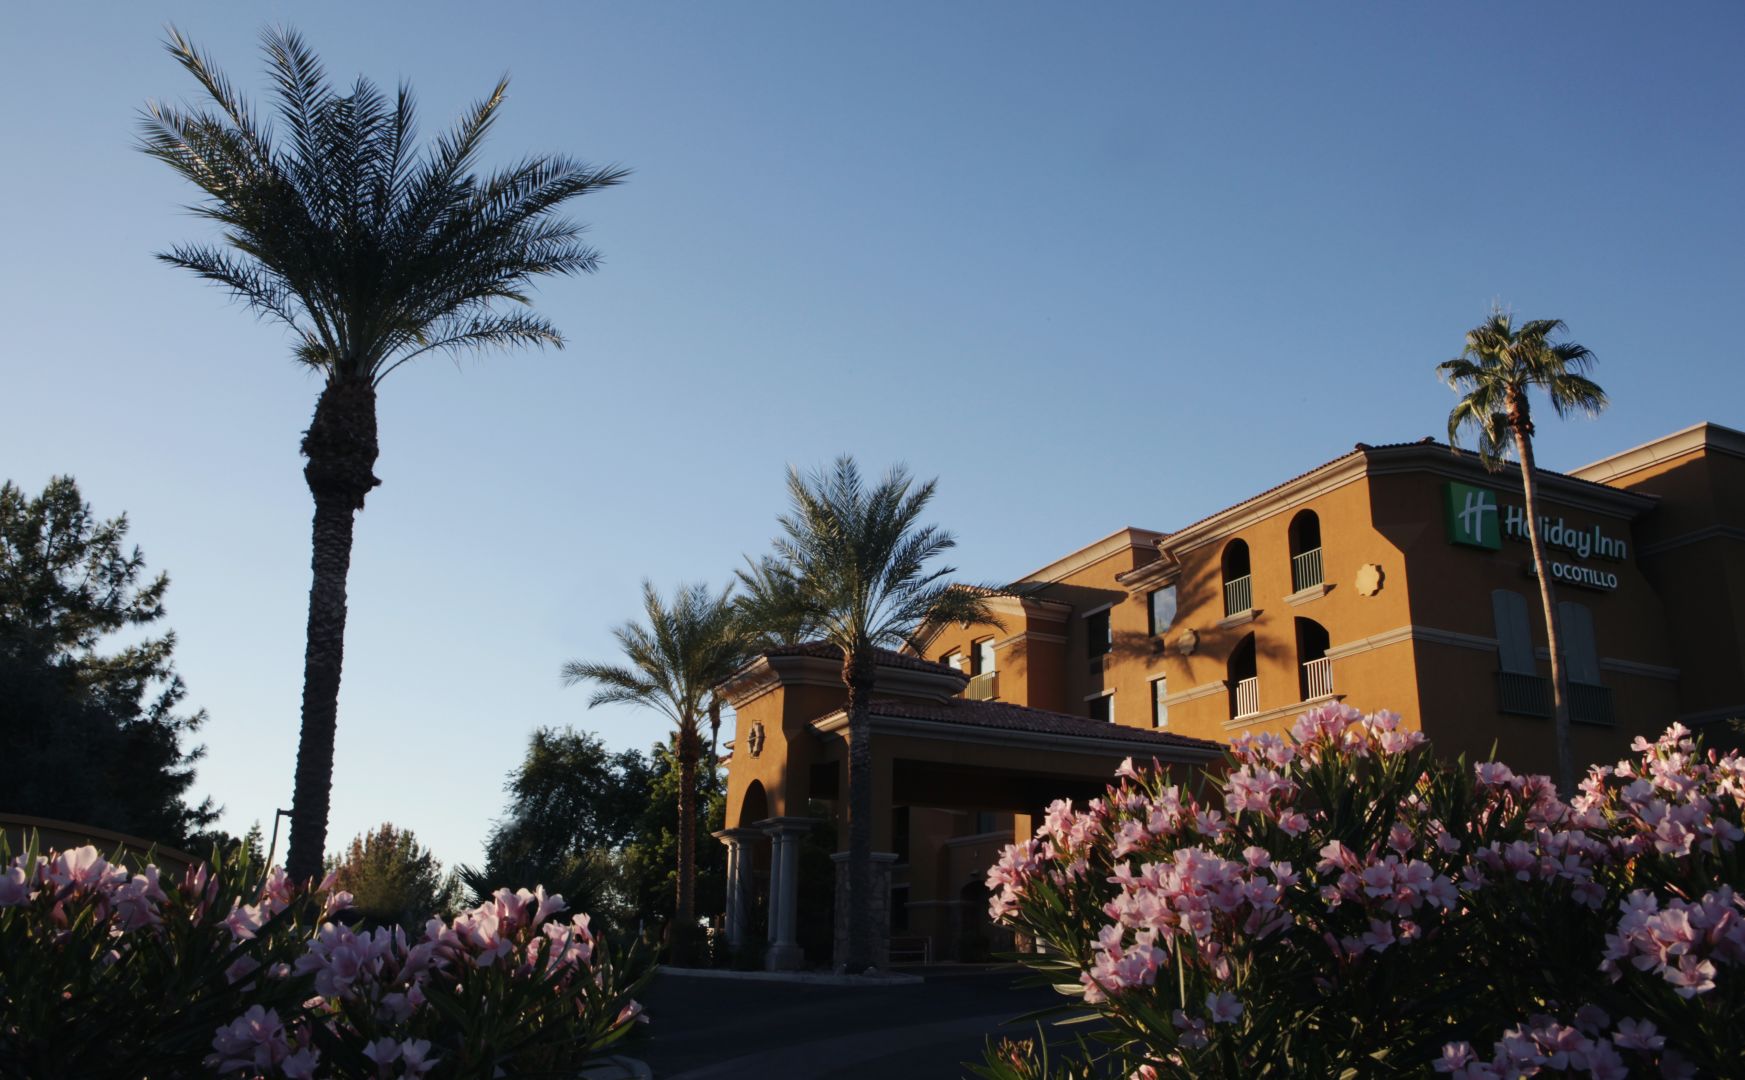 HREC Investment Advisors exclusively represented Ocotillo Hospitalityduring the transaction